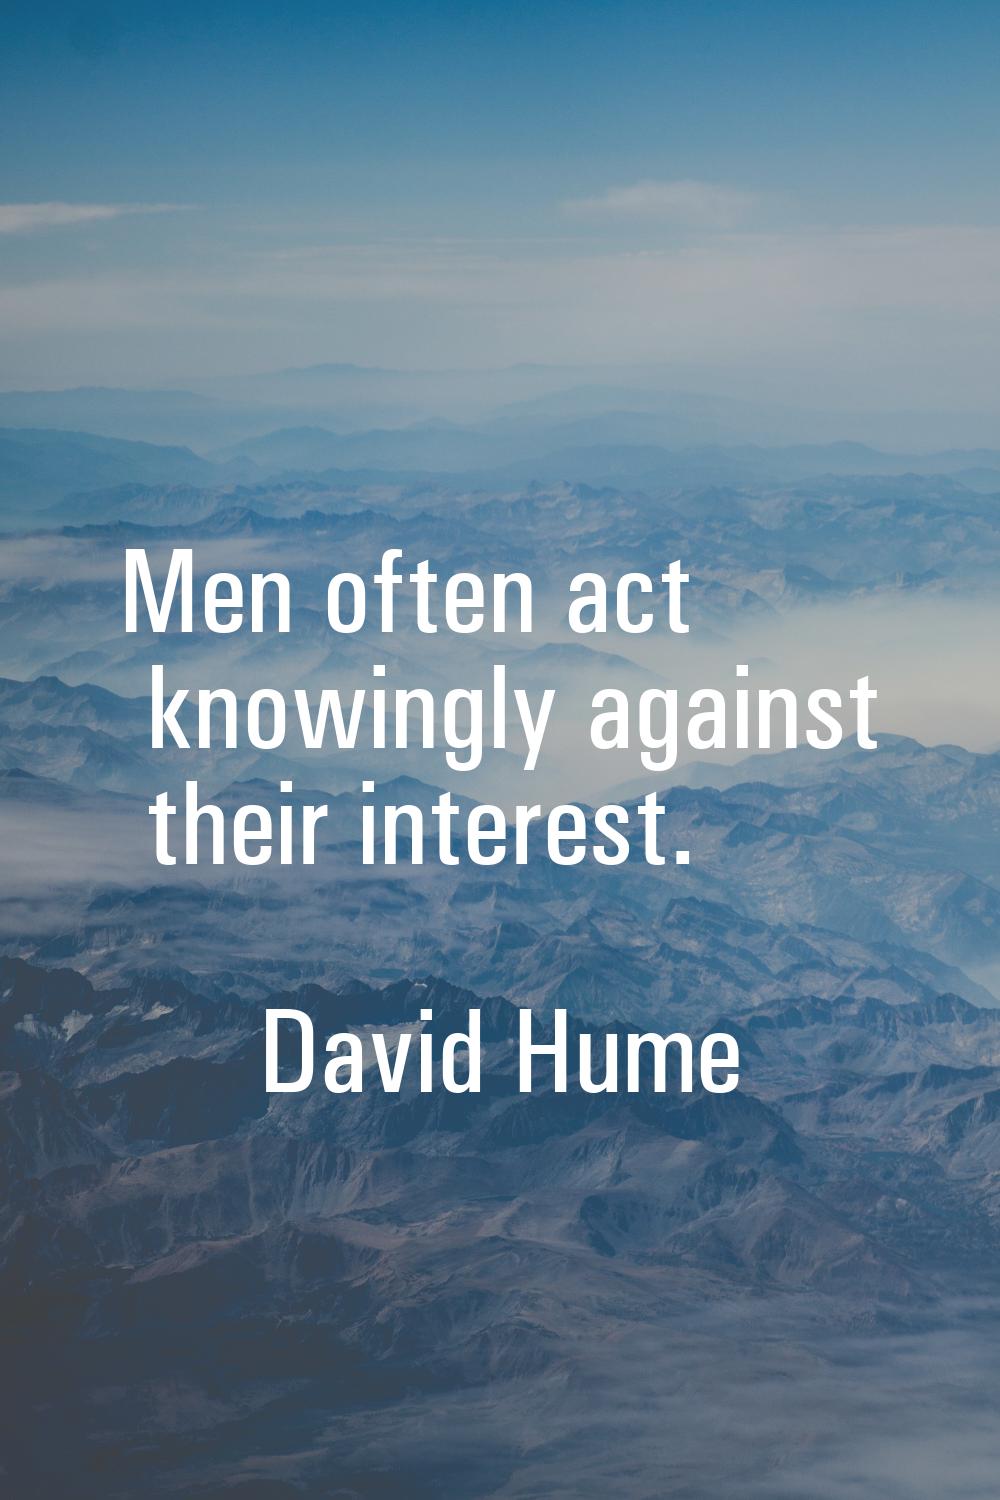 Men often act knowingly against their interest.